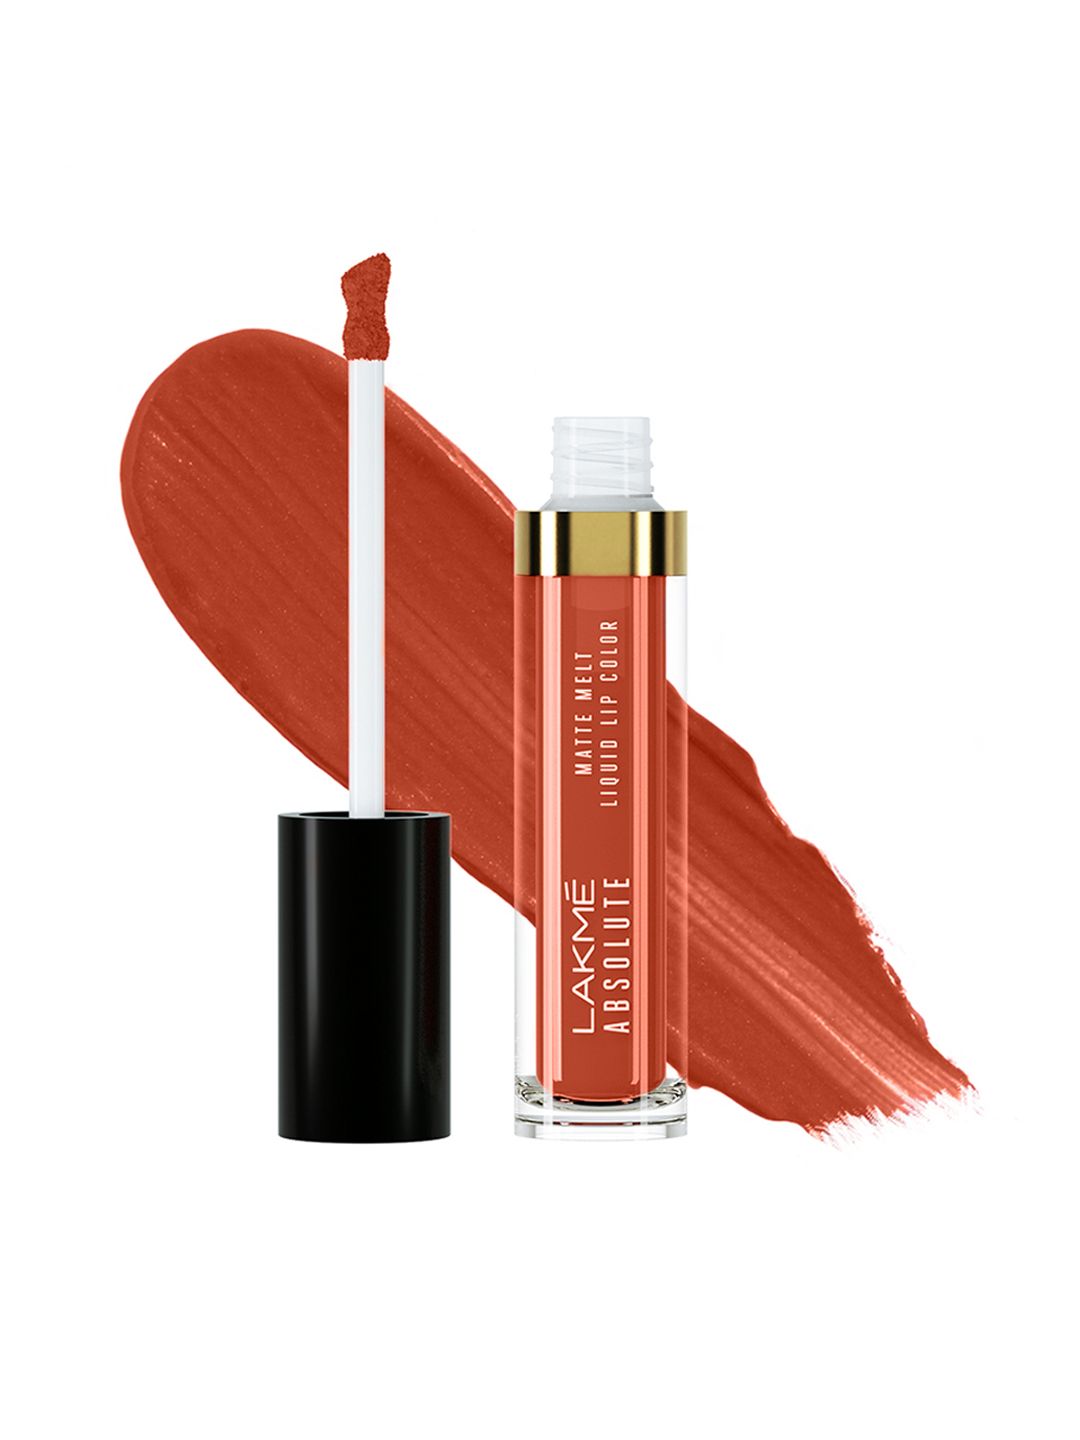 Lakme Absolute Matte Melt Liquid Lip Color - Earthy Brown 337 Price in India